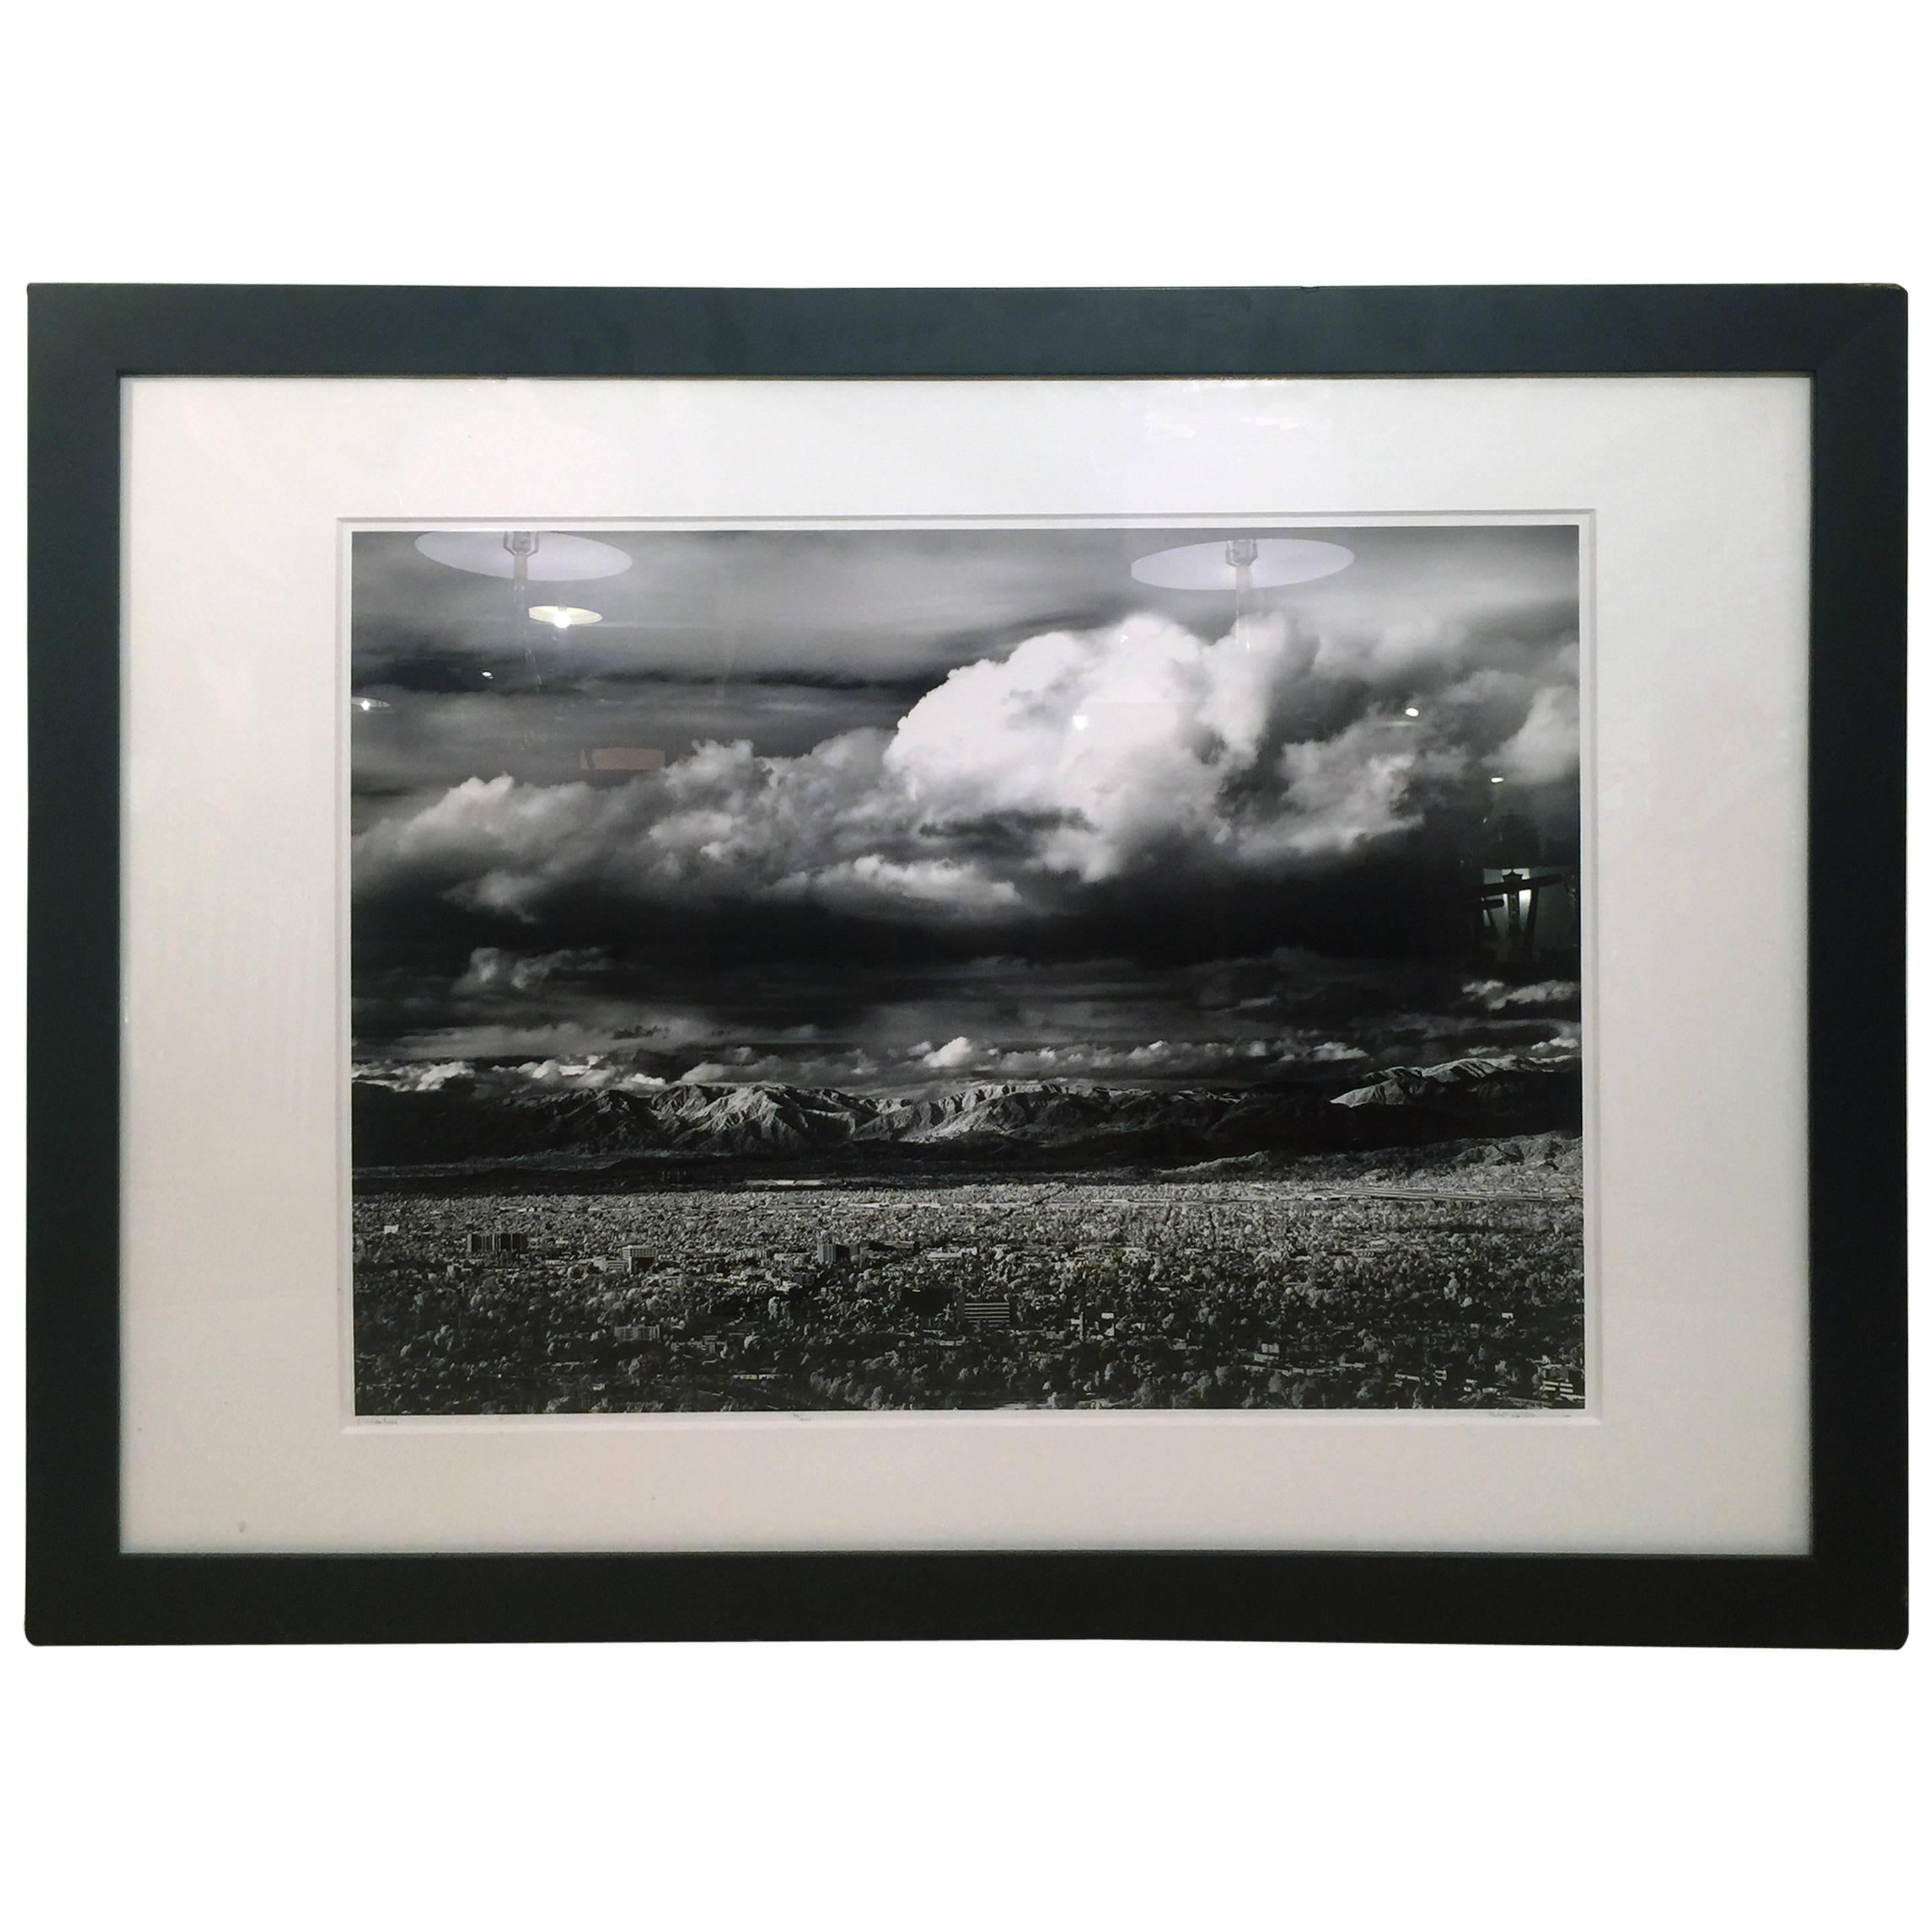 Signed Limited Edition Photograph by Mitch Dobrowner